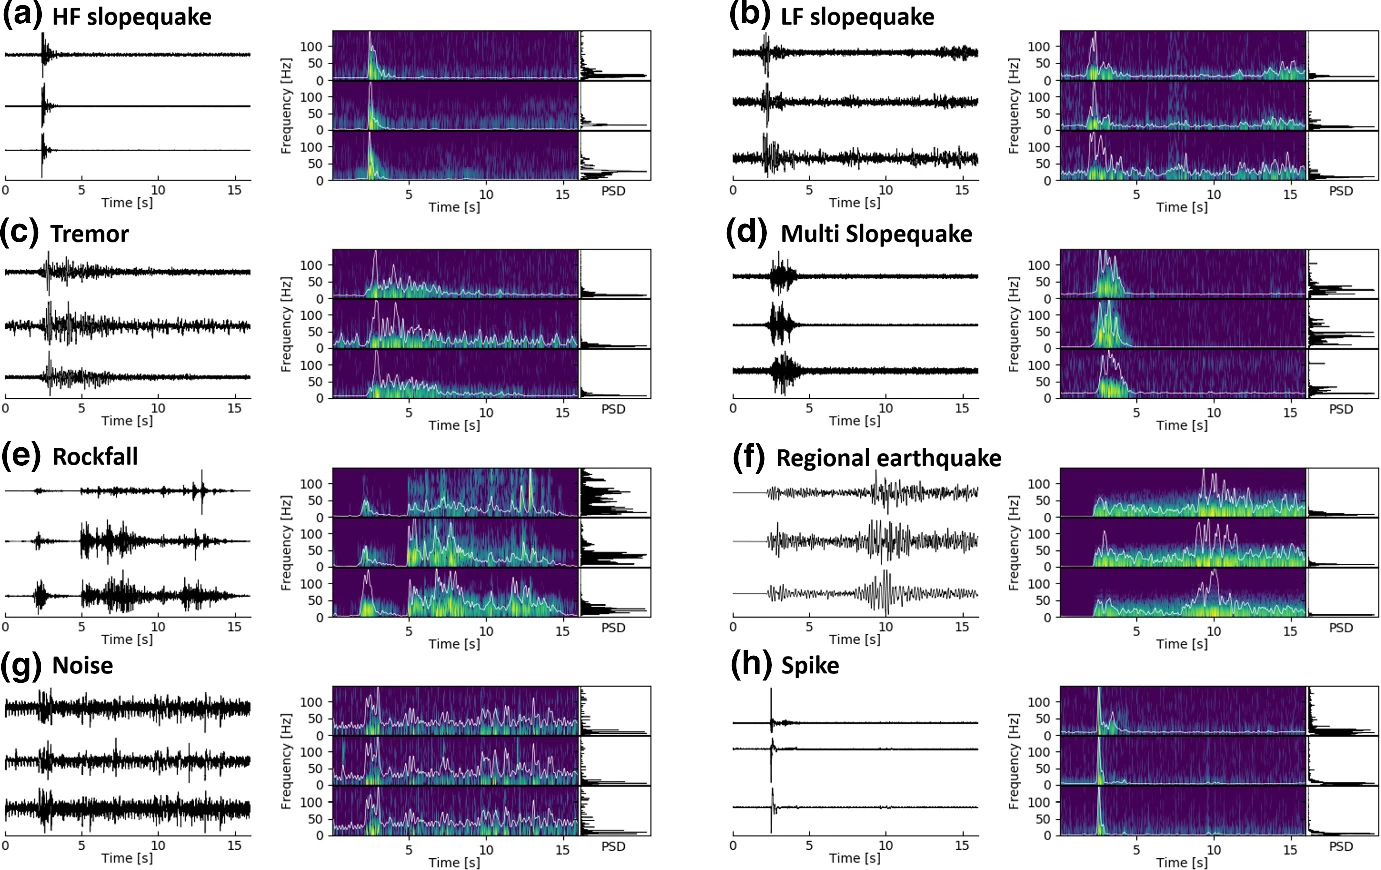 Ensemble and Self-supervised Learning for Improved Classification of Seismic Signals from the Åknes Rockslope (2022)